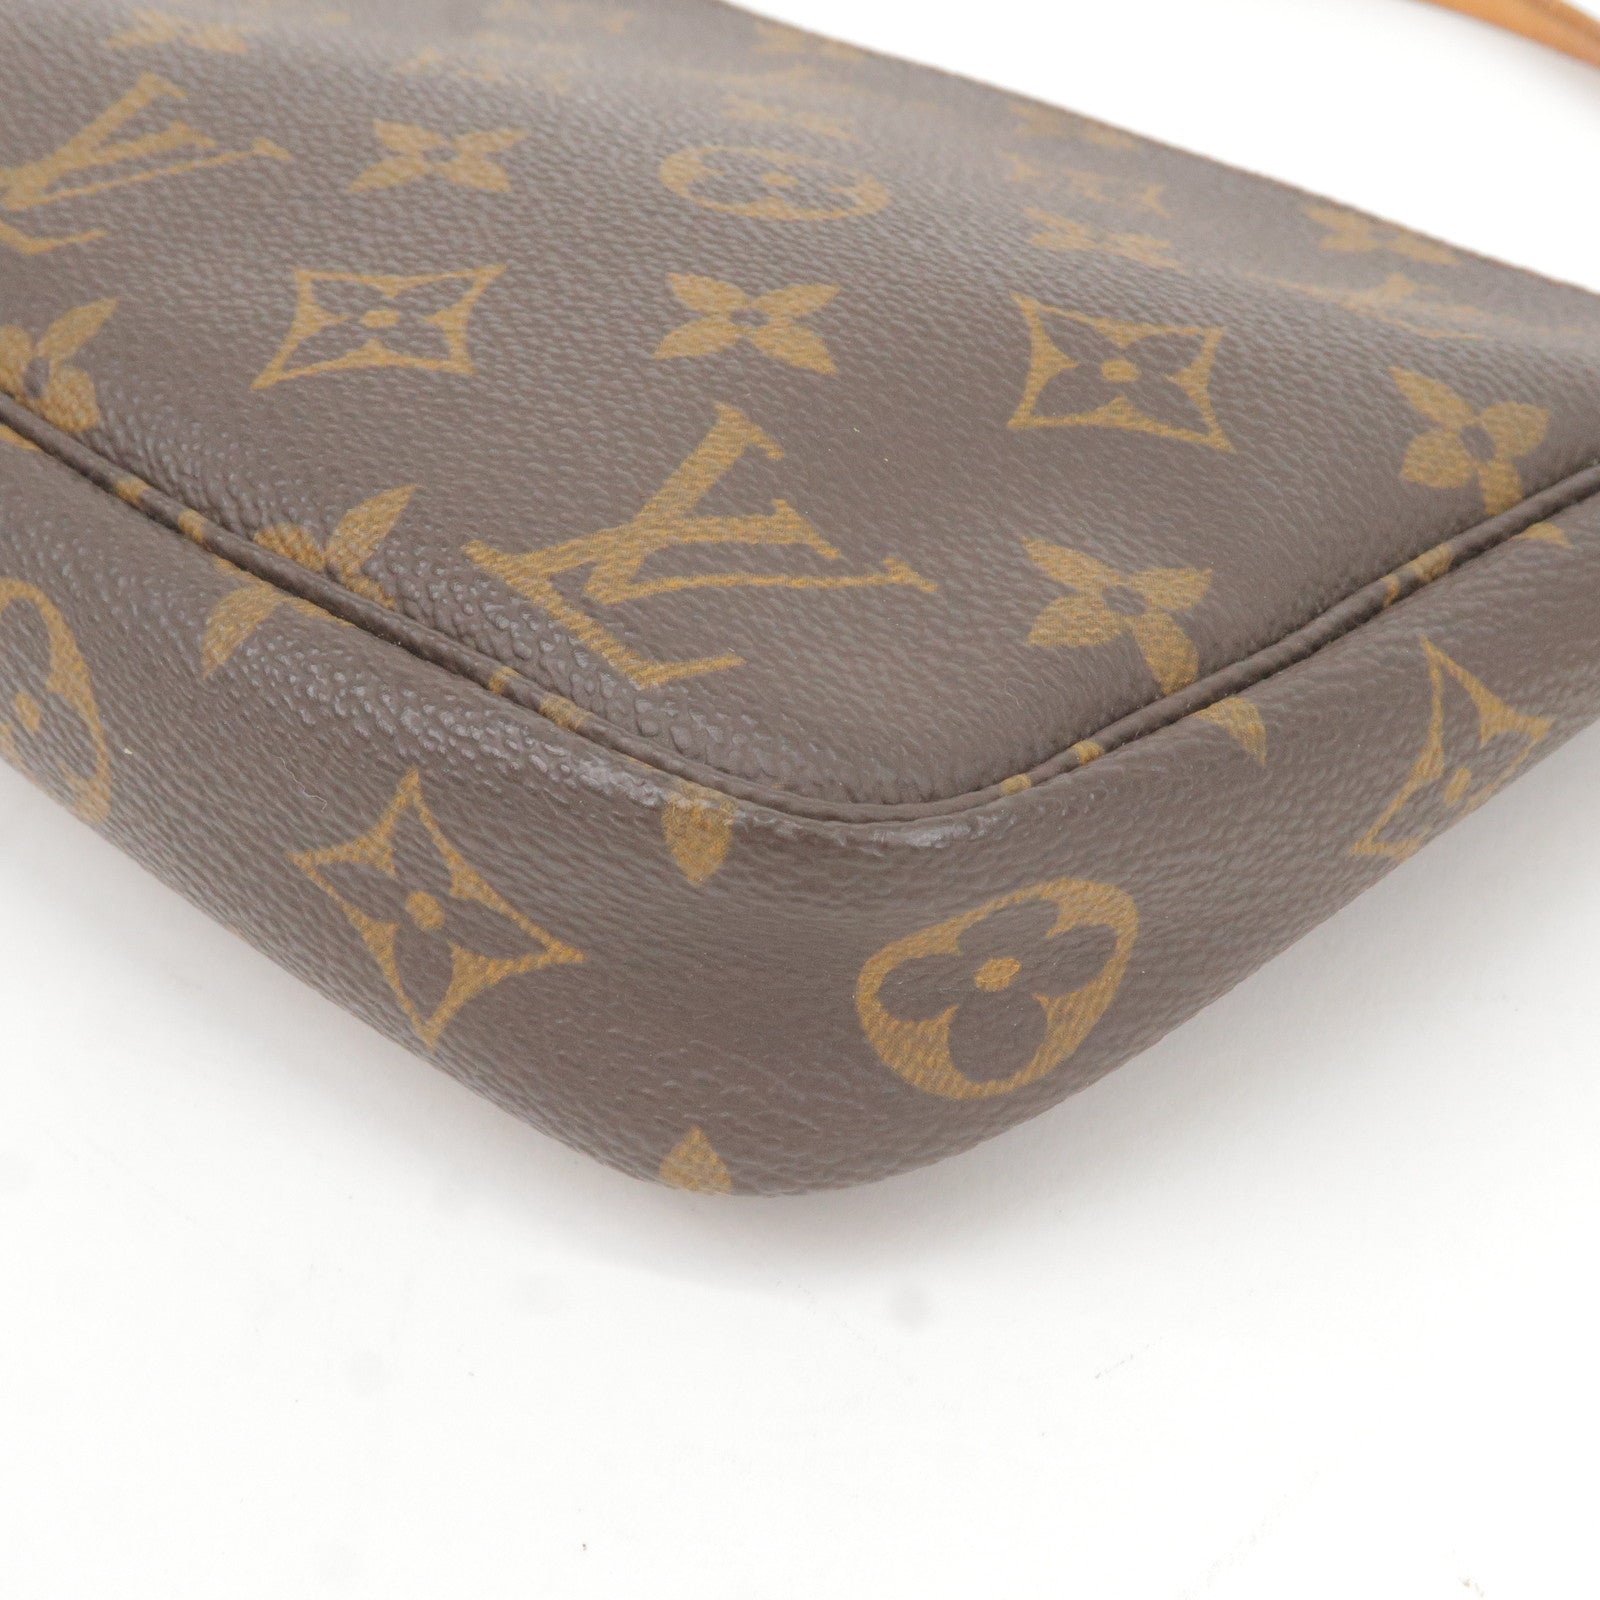 Louis Vuitton 2000 Pre-owned Navona Clutch Bag - Brown